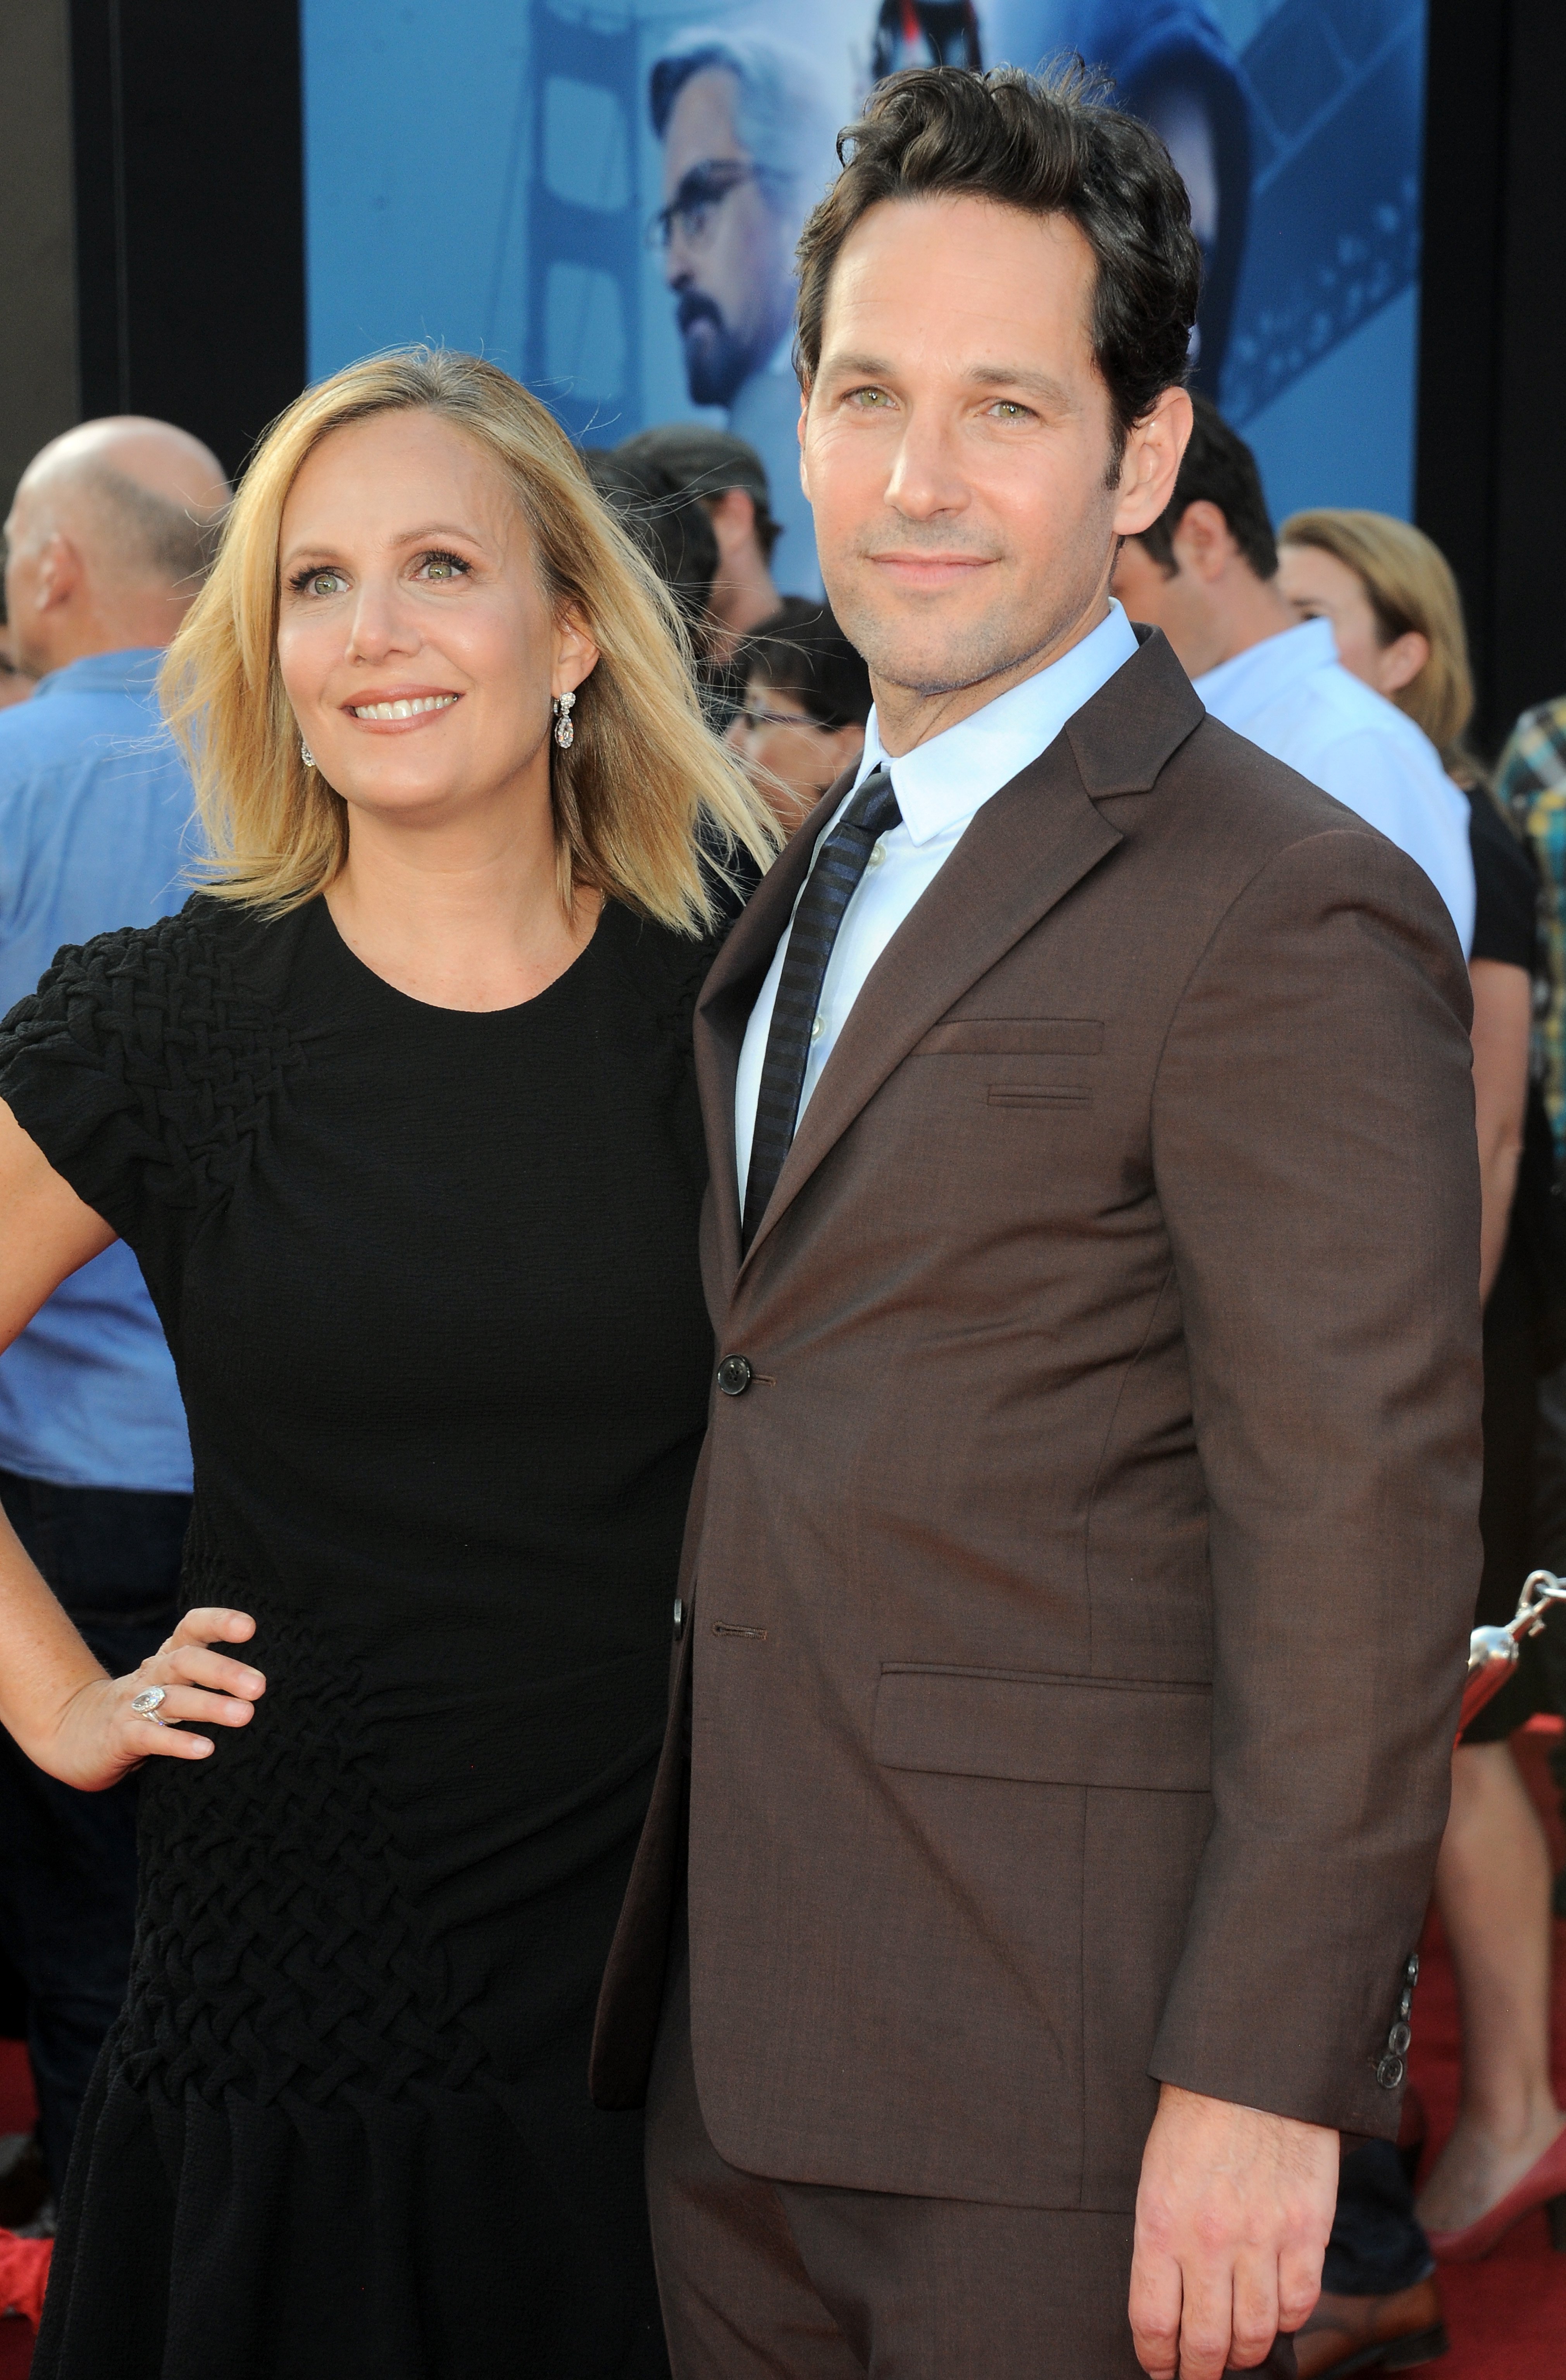 Paul Rudd and his wife Julie Yaeger attend the Marvel's "Ant-Man" premiere at Dolby Theatre on June 29, 2015, in Hollywood, California. | Source: Getty Images